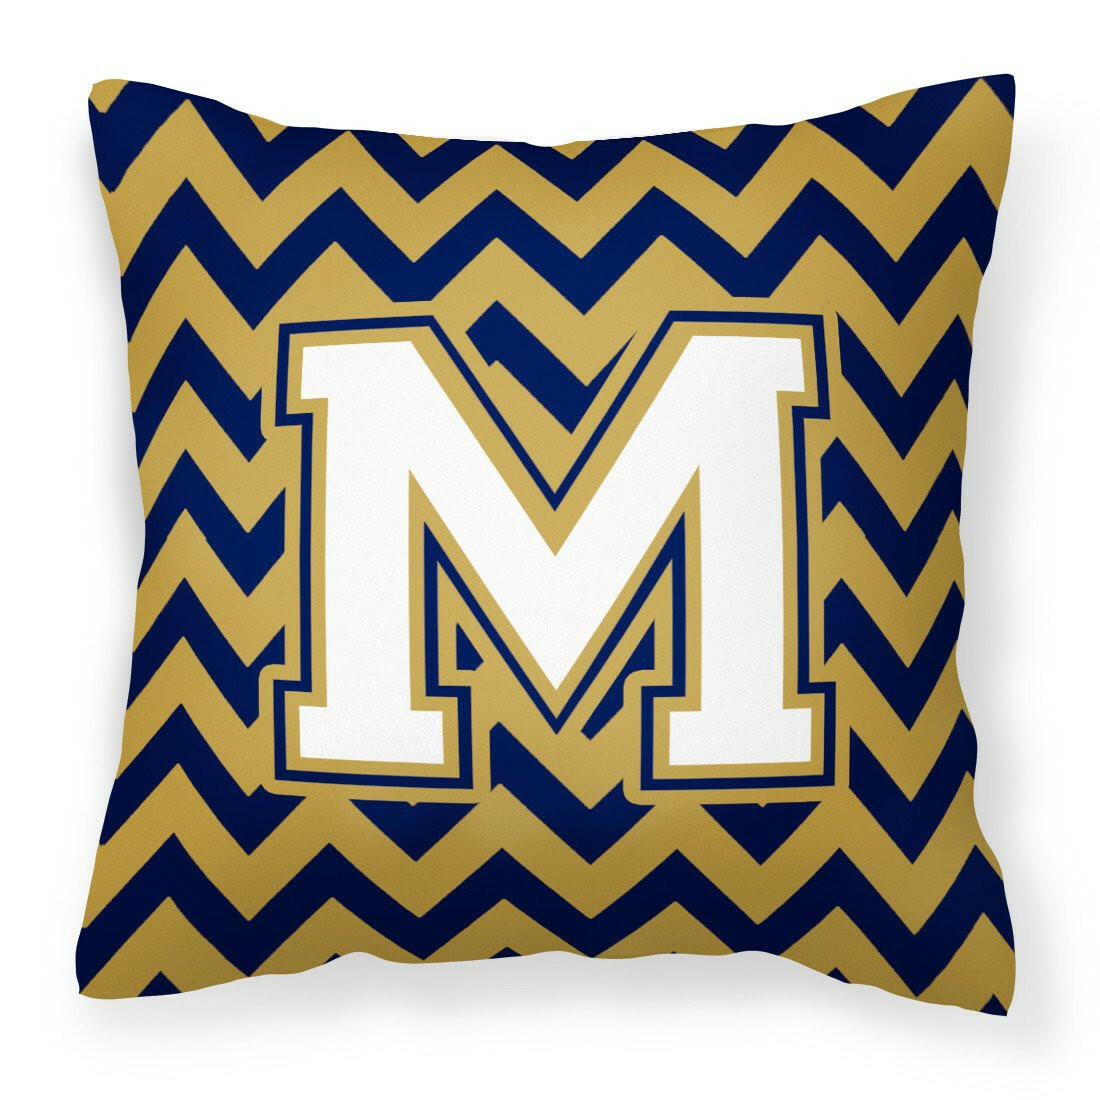 Letter M Chevron Navy Blue and Gold Fabric Decorative Pillow CJ1057-MPW1414 by Caroline's Treasures